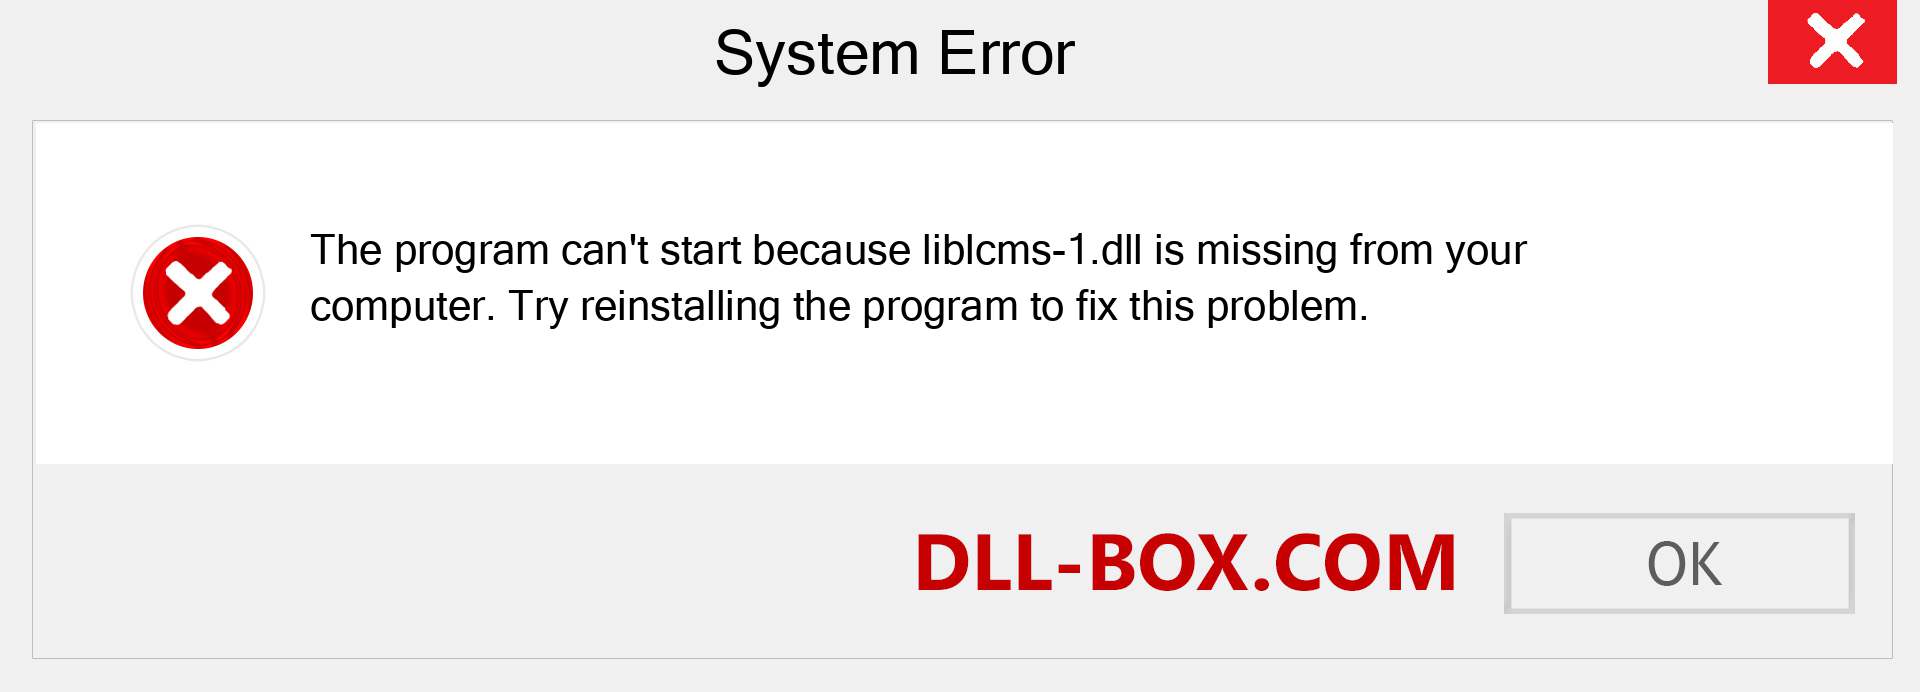  liblcms-1.dll file is missing?. Download for Windows 7, 8, 10 - Fix  liblcms-1 dll Missing Error on Windows, photos, images